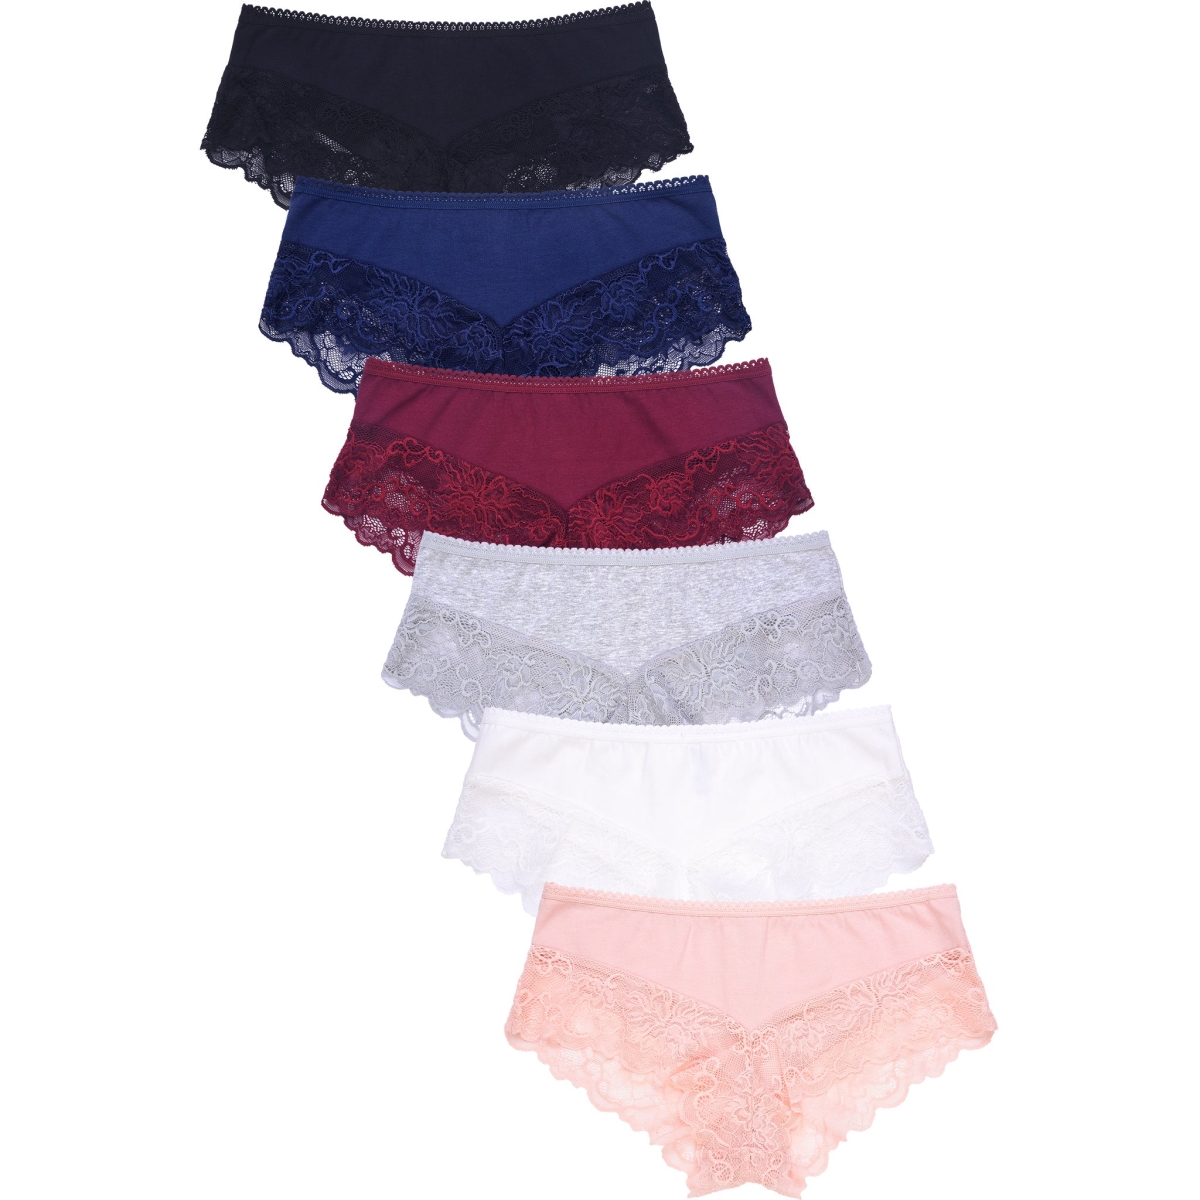 Picture of 247 Frenzy 247-LP1408CH2-SM Womens Essentials Cotton Stretch Hipster Panty Underwear - Assorted Color - Small - Pack of 6